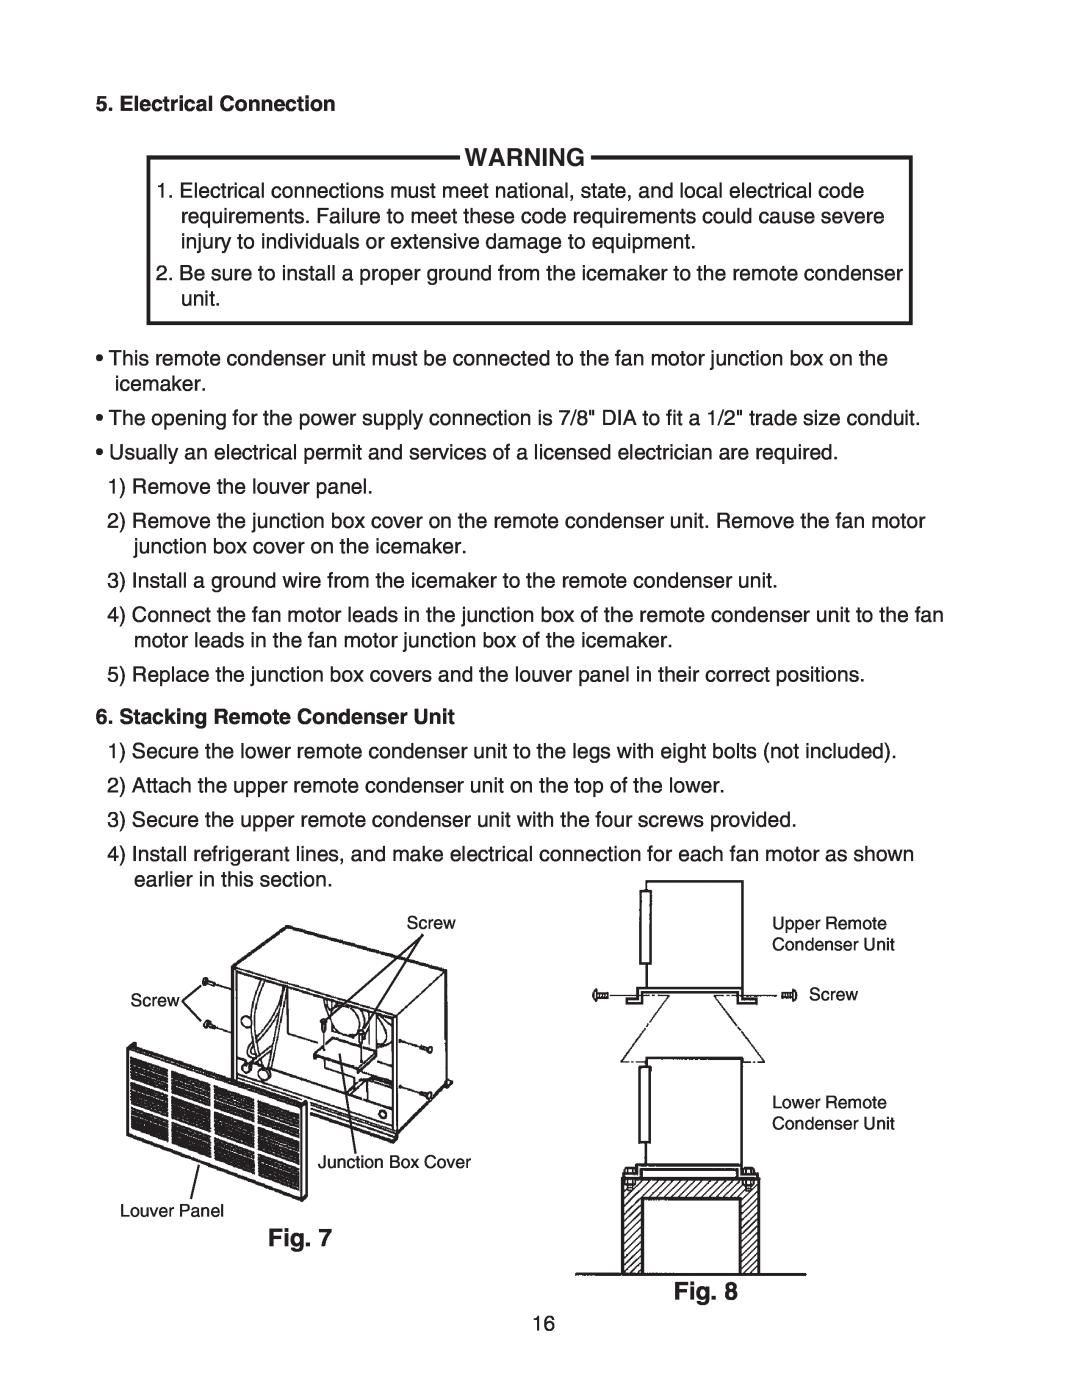 Hoshizaki KMD-901MRH, KMD-901MAH, KMD-901MWH instruction manual Electrical Connection, Stacking Remote Condenser Unit 